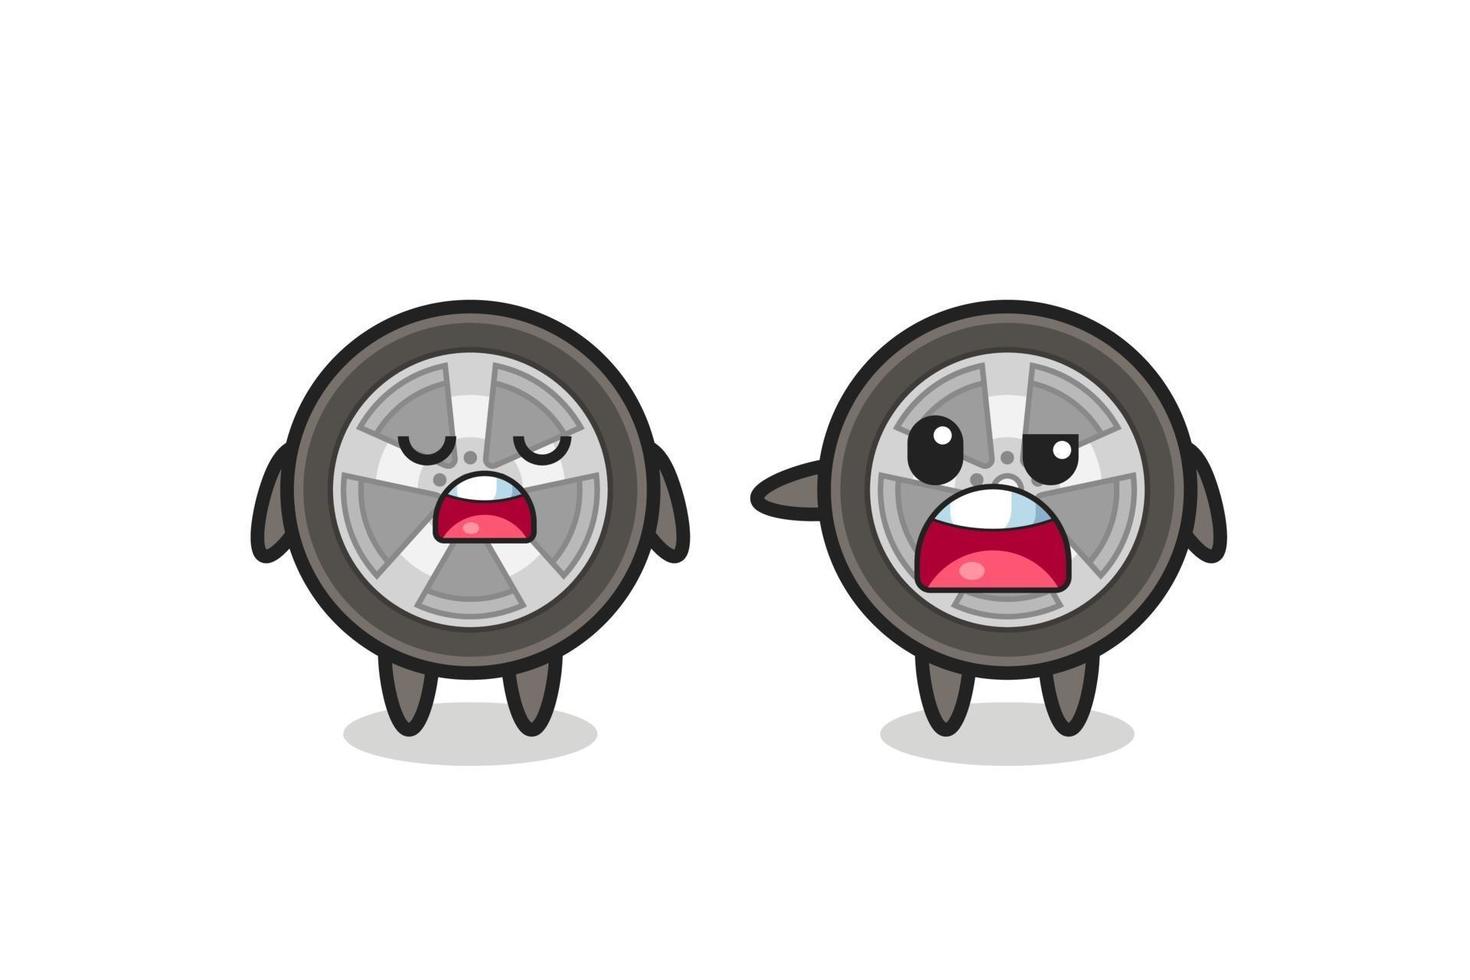 illustration of the argue between two cute car wheel characters vector